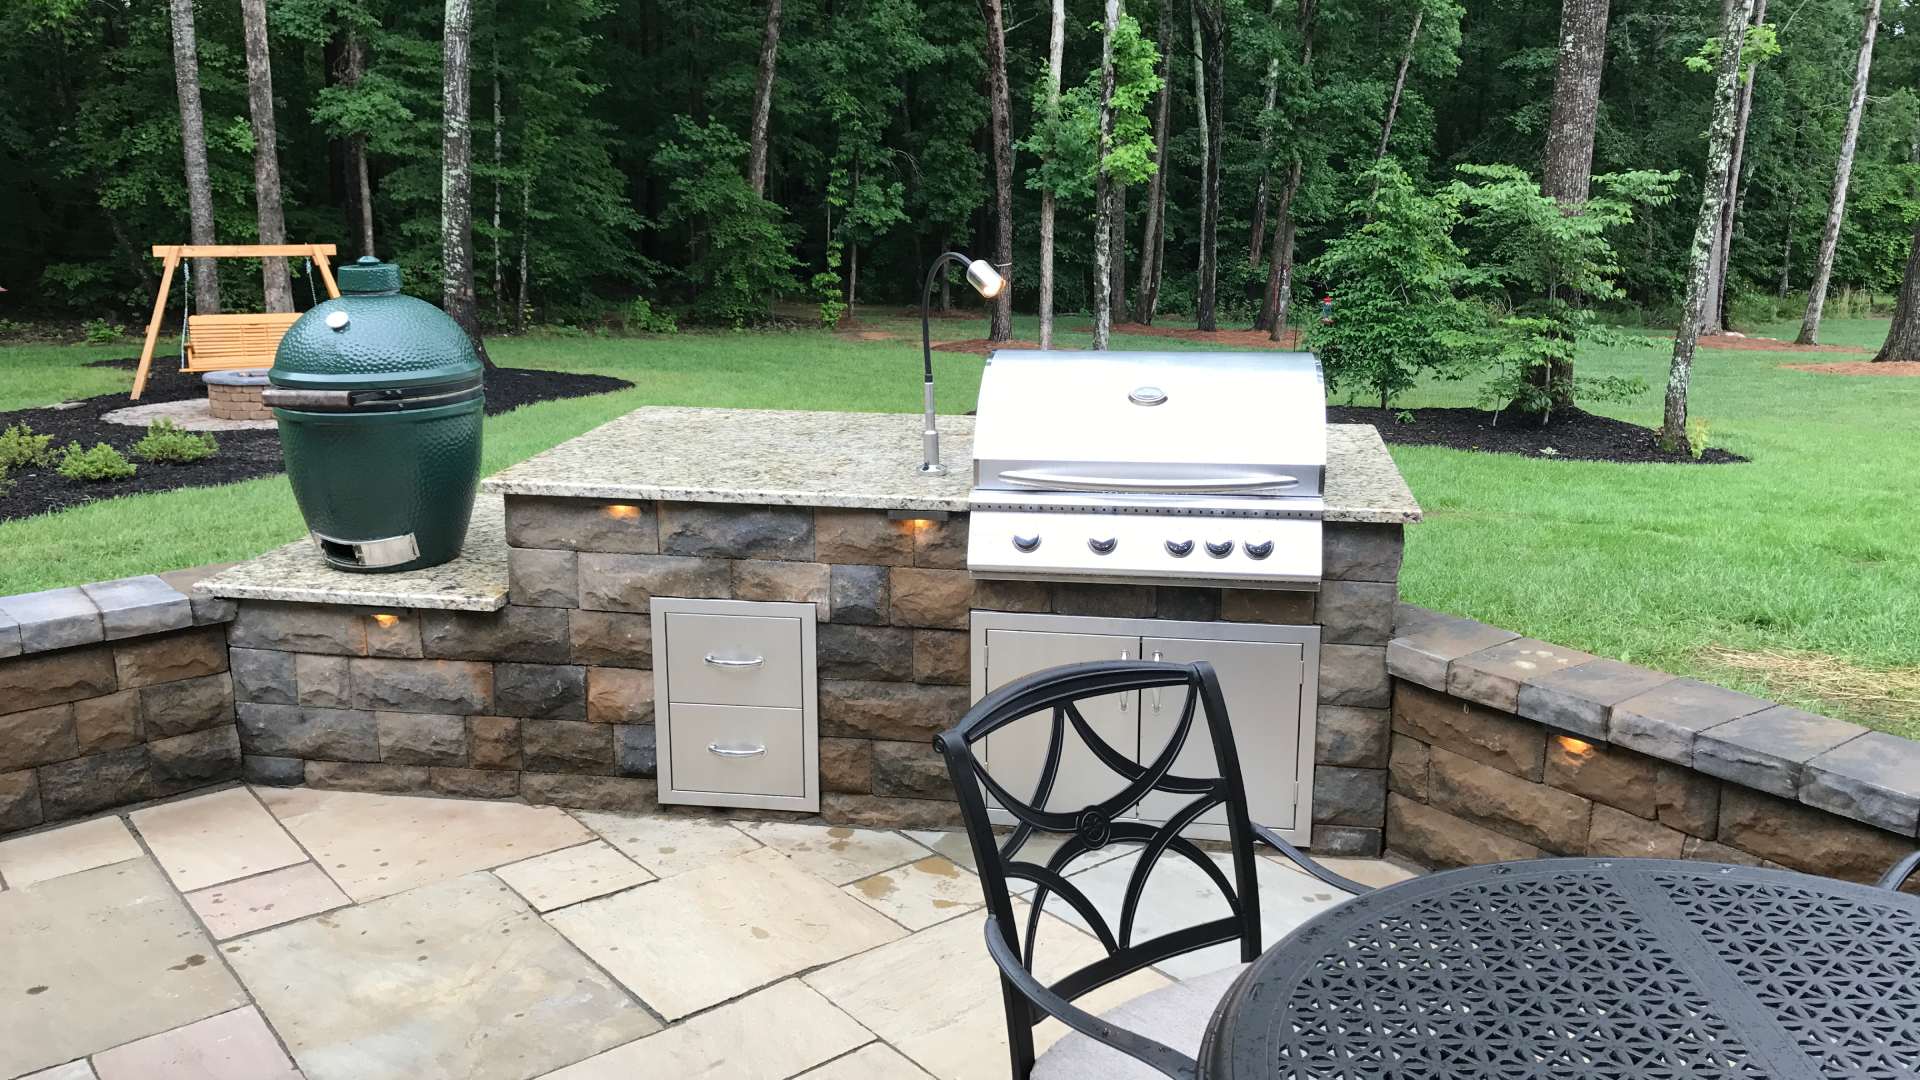 3 Things to Consider When Designing an Outdoor Kitchen